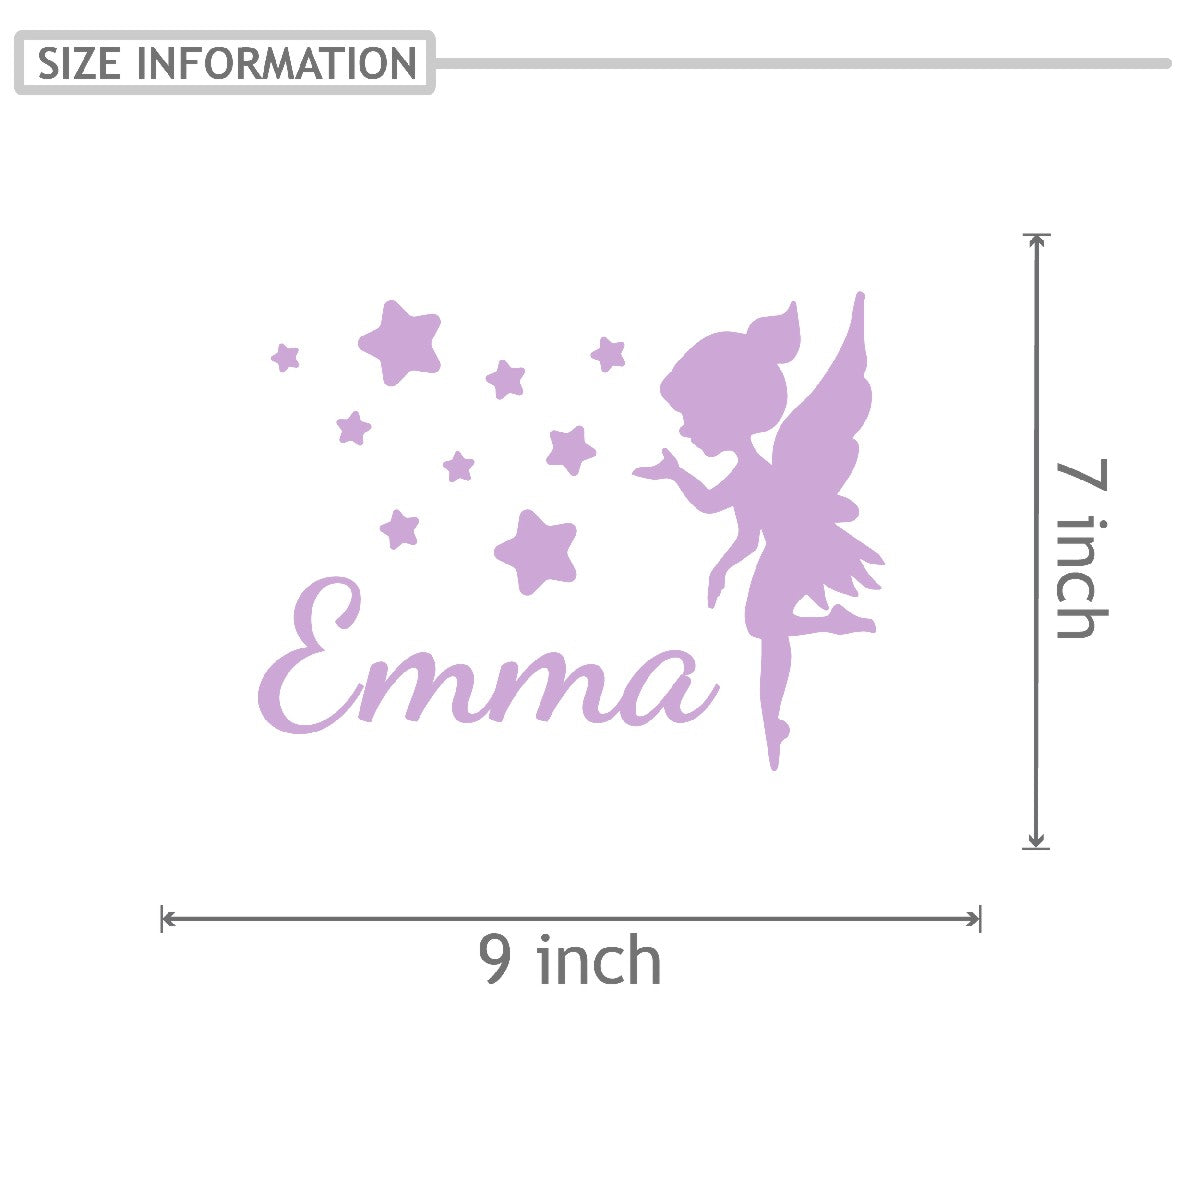 Personalized Name Stickers with Fairy and Stars - Durable Custom Name Stickers for Furniture Laptops - Unique Name Wall Decals for Girls and Boys - Cute Name Decal